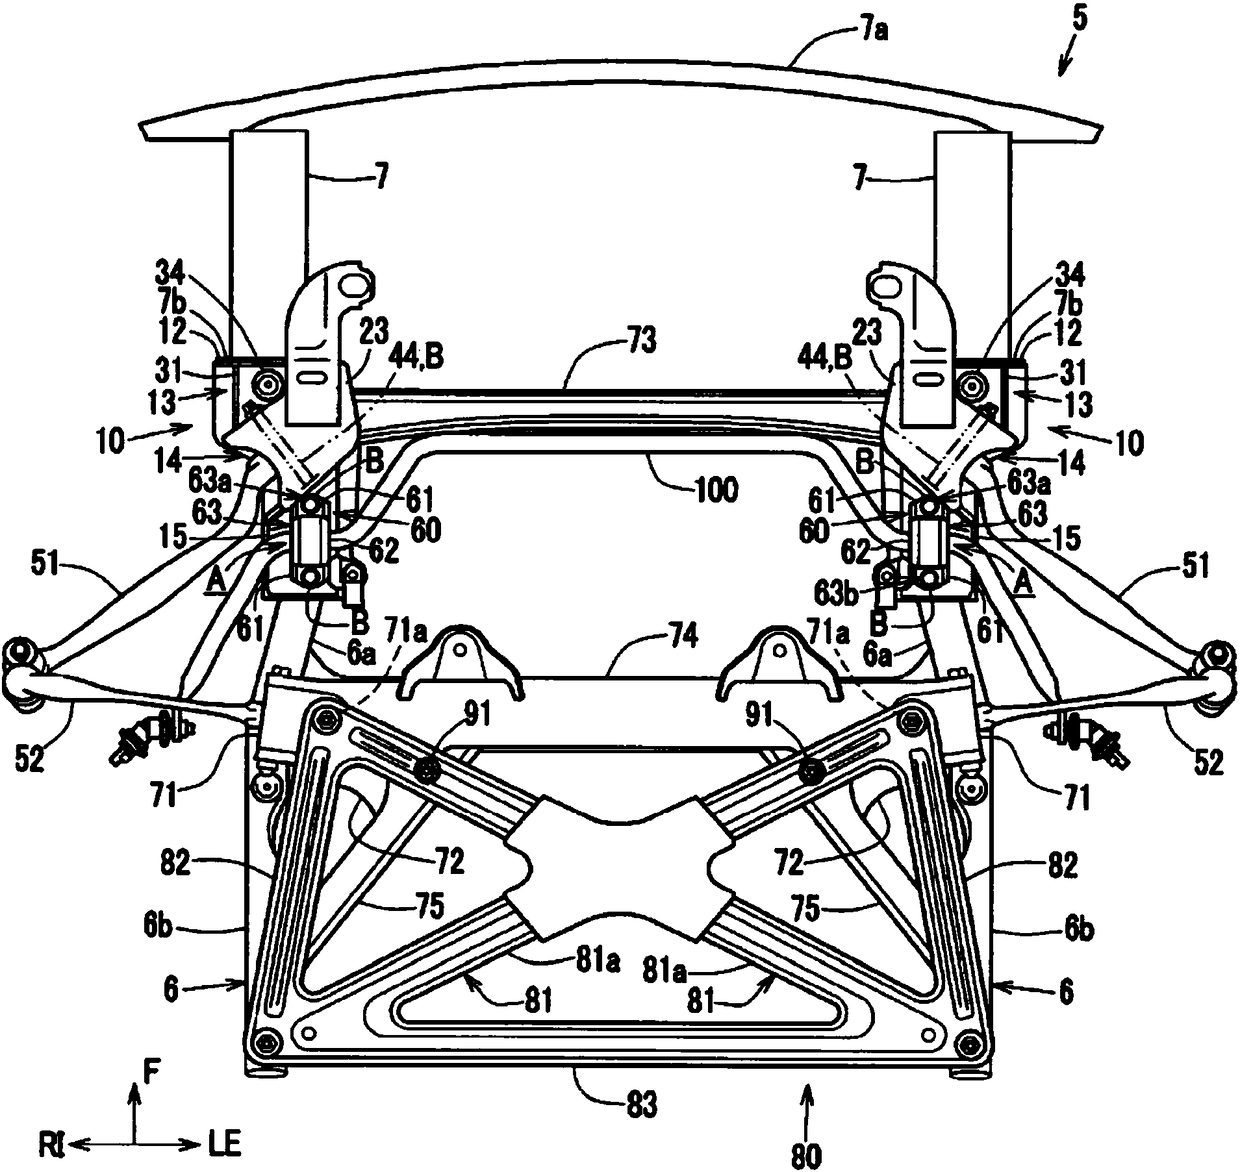 Front sub-frame structure